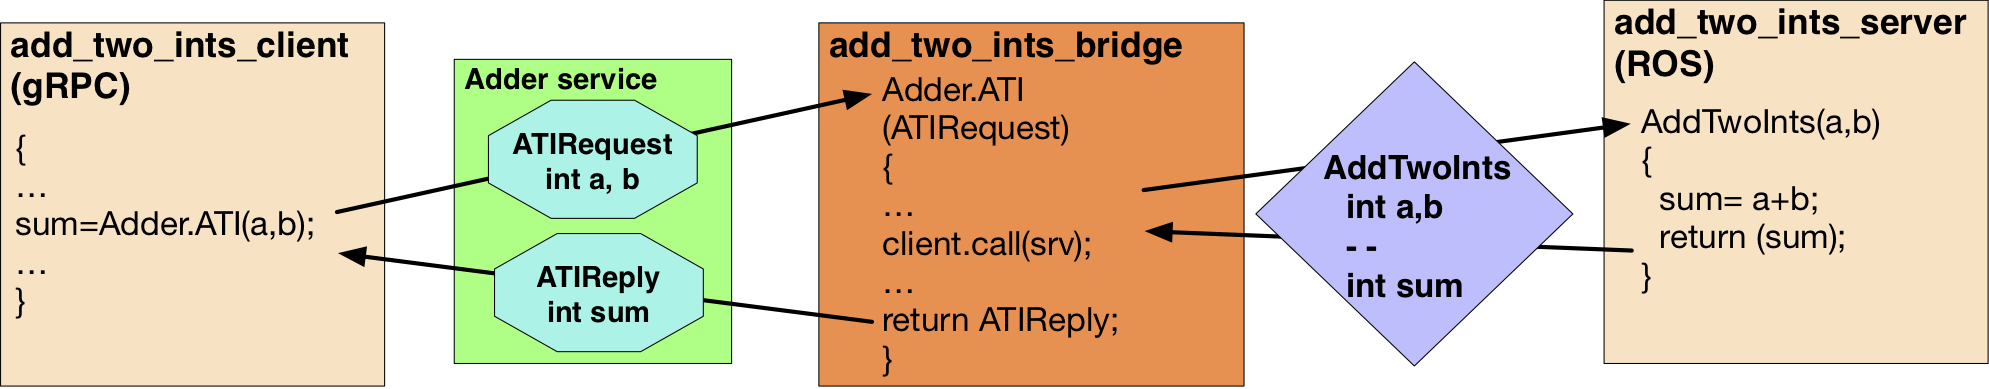 The setup for a gRPC client calling a bridge server calling a ROS Service (add_two_ints)